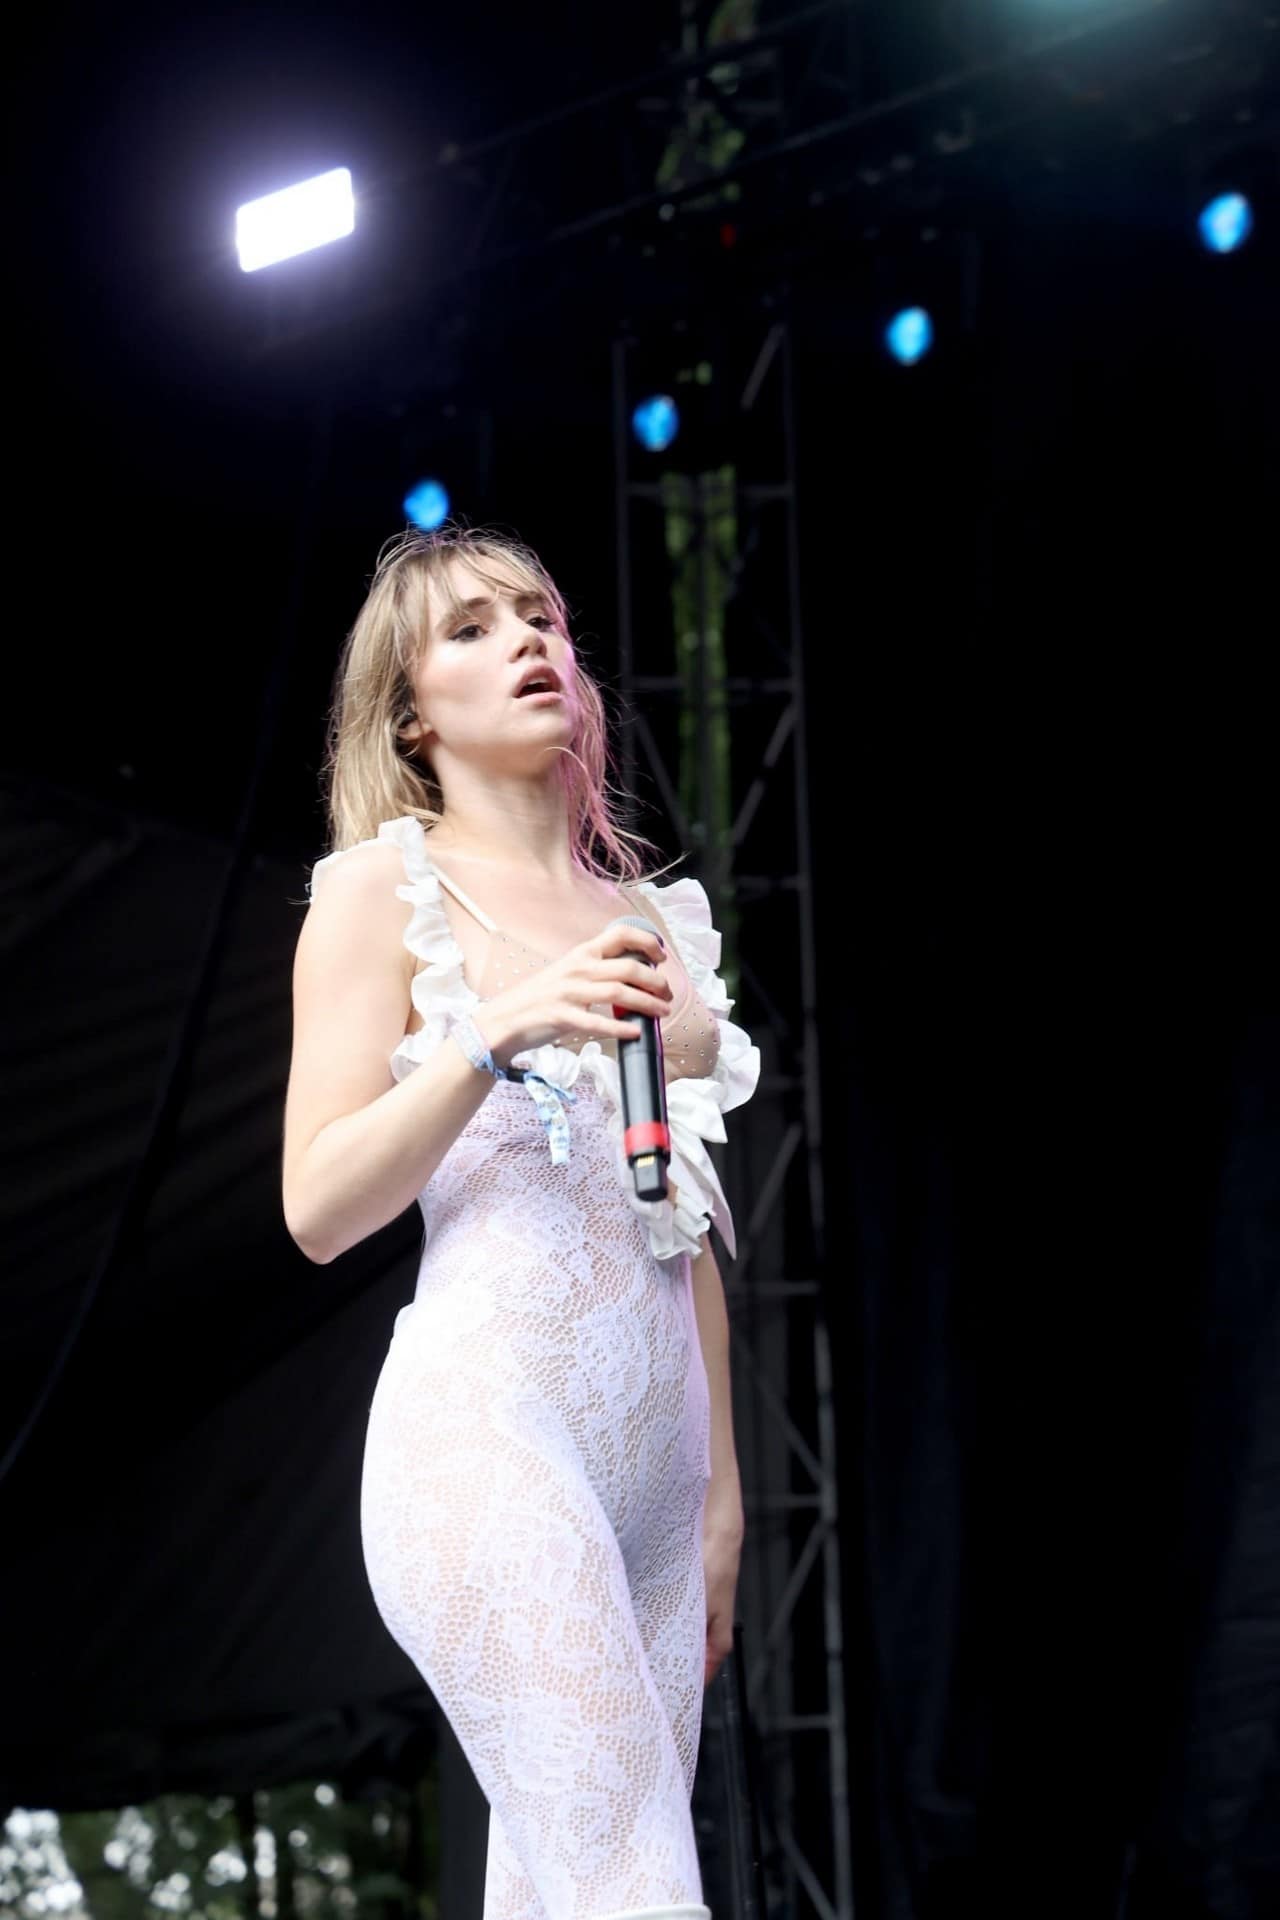 Suki Waterhouse Sizzles in Plunging Lace Jumpsuit at Lollapalooza